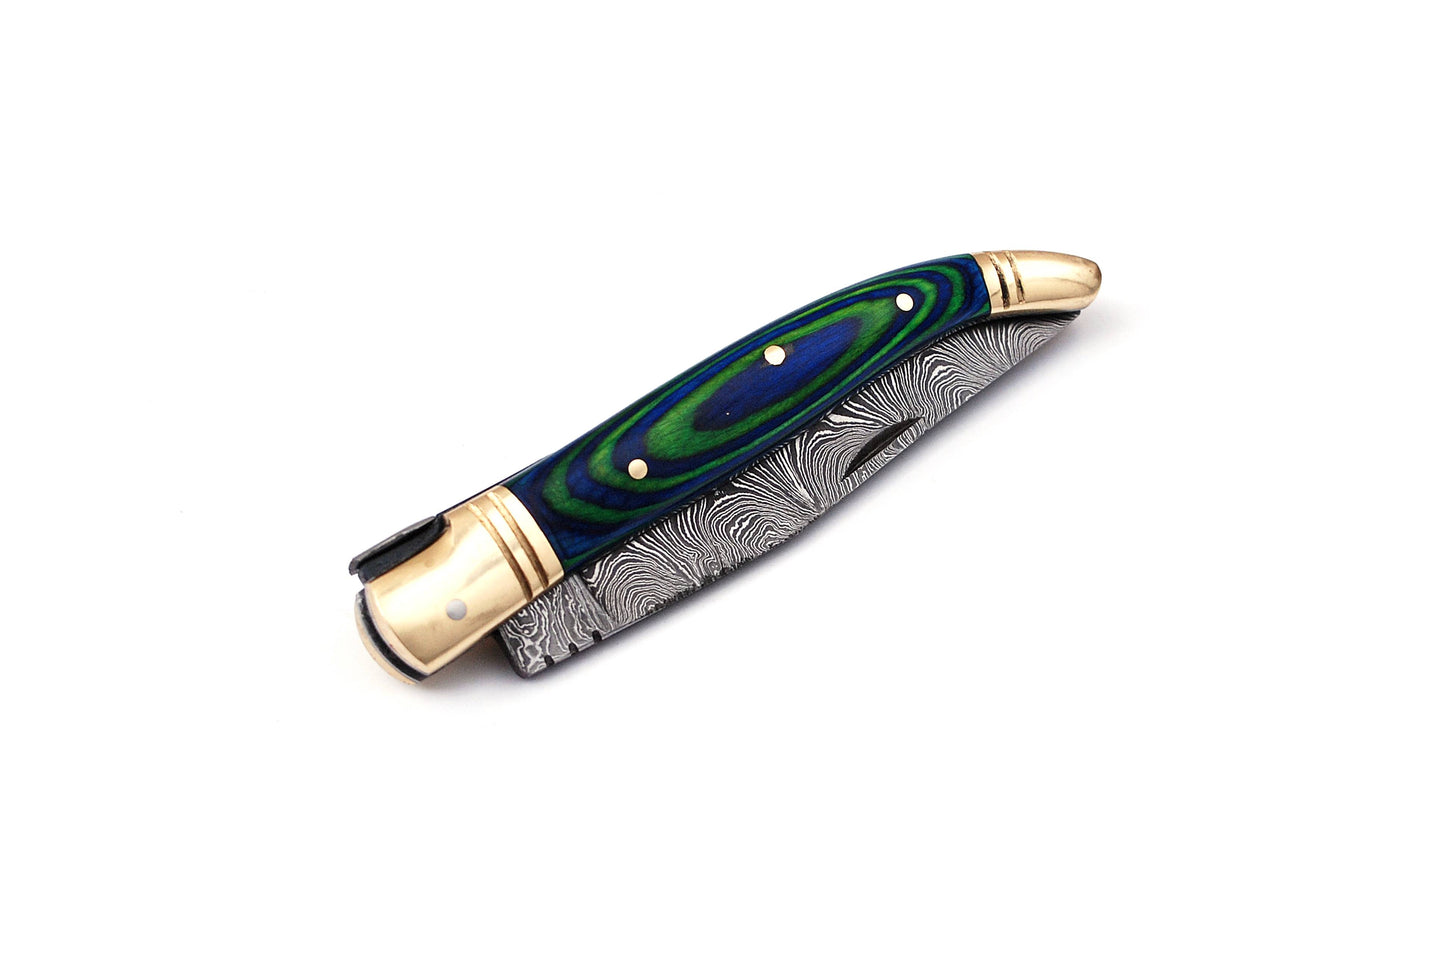 Folding Damascus steel knife, 8.5" Long with 4" hand forged custom twist pattern Blade. 2 tone Blue & Green wood scale with brass bolster, Cow hide leather sheath included